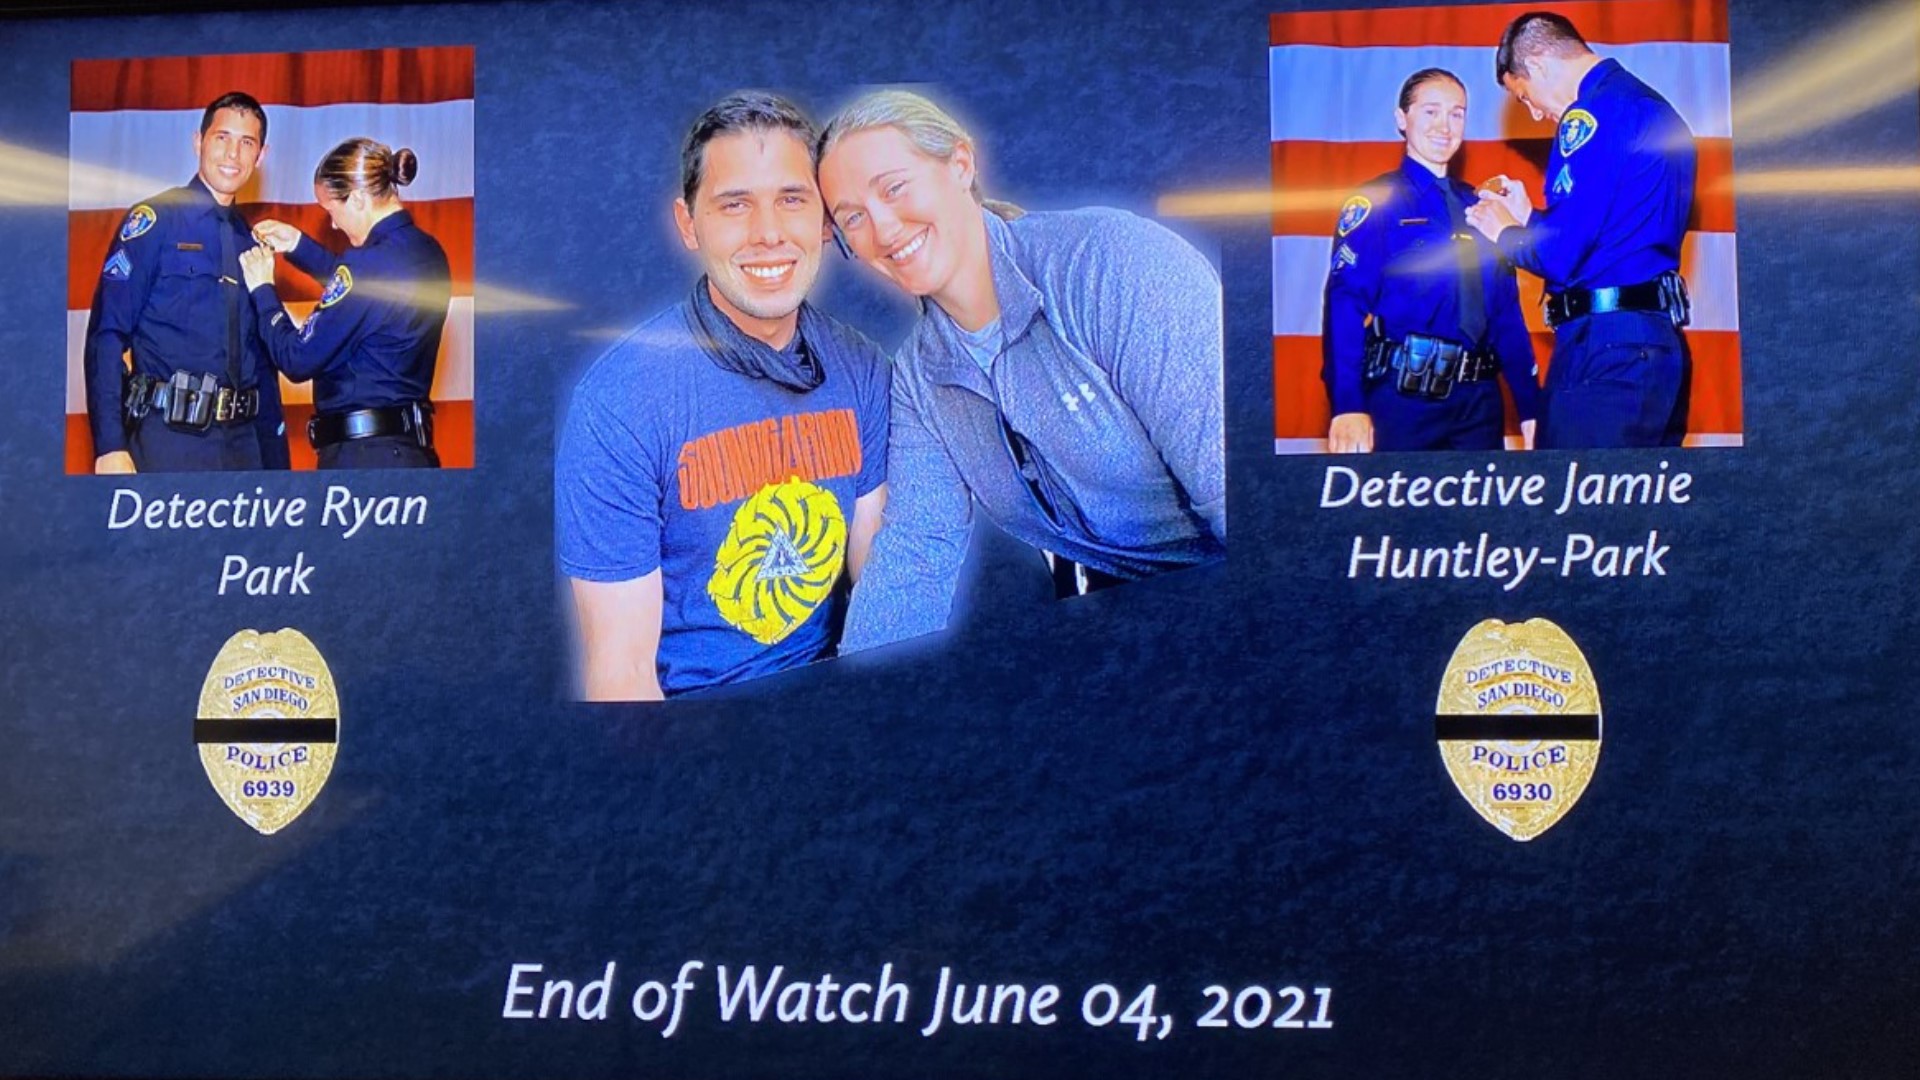 The 2 San Diego police detectives who died after being hit by a wrong-way driver on I-5 were identified as a married couple, Jamie Huntley-Park and Ryan Park.